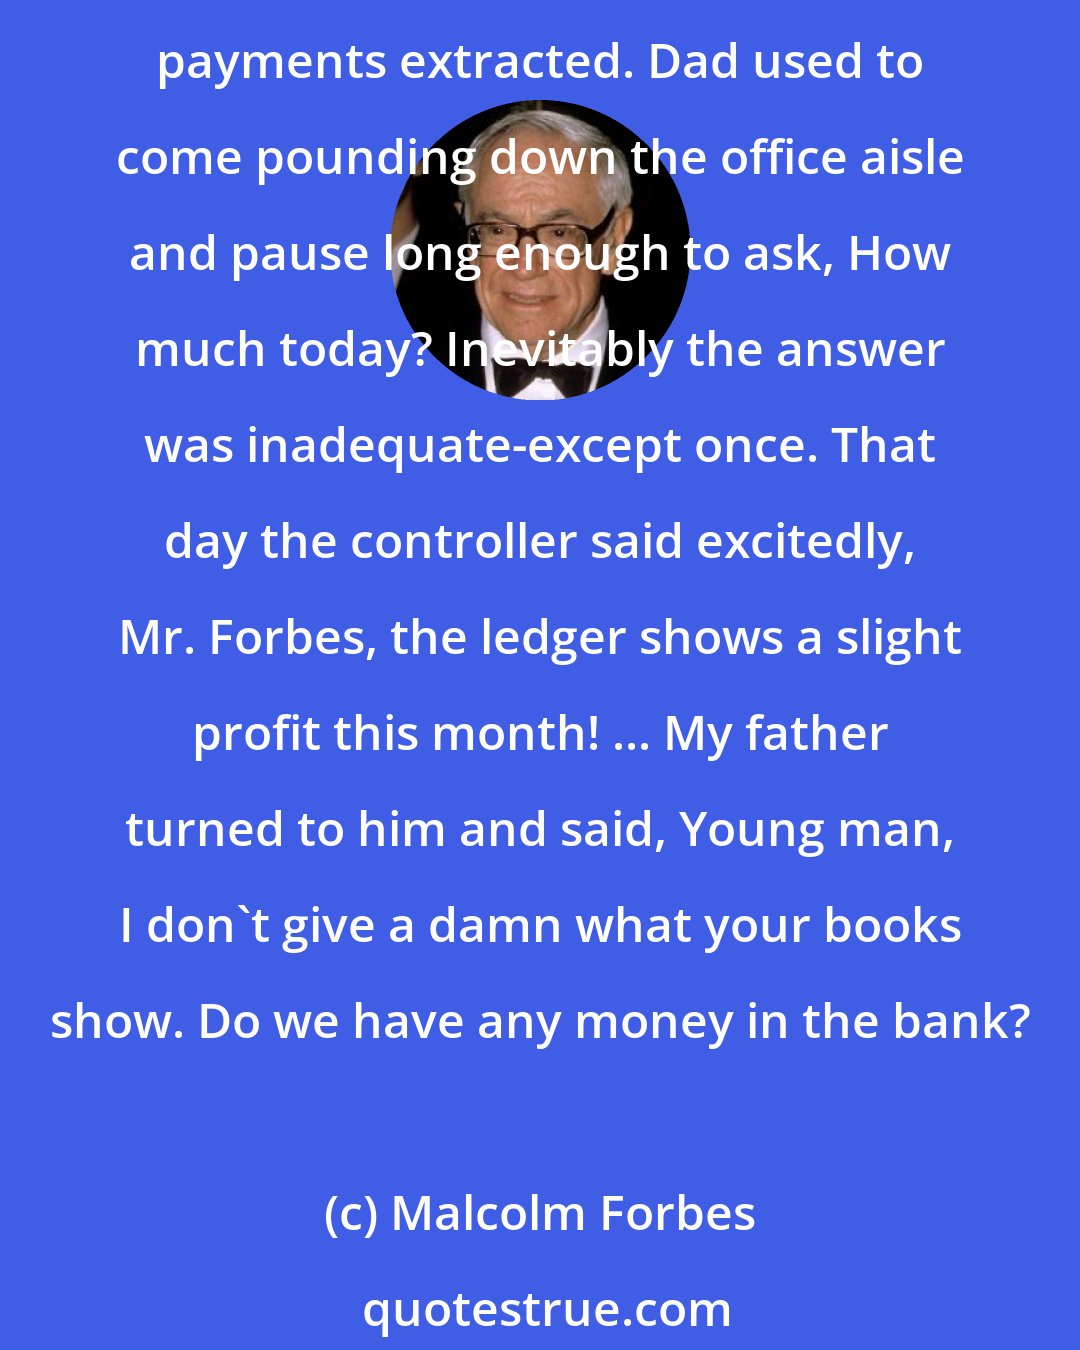 Malcolm Forbes: Several weeks of summer vacation in the Thirties I spent working at $15 a week in the FORBES office.... I worked in the mail cage, where envelopes were slit and subscription payments extracted. Dad used to come pounding down the office aisle and pause long enough to ask, How much today? Inevitably the answer was inadequate-except once. That day the controller said excitedly, Mr. Forbes, the ledger shows a slight profit this month! ... My father turned to him and said, Young man, I don't give a damn what your books show. Do we have any money in the bank?